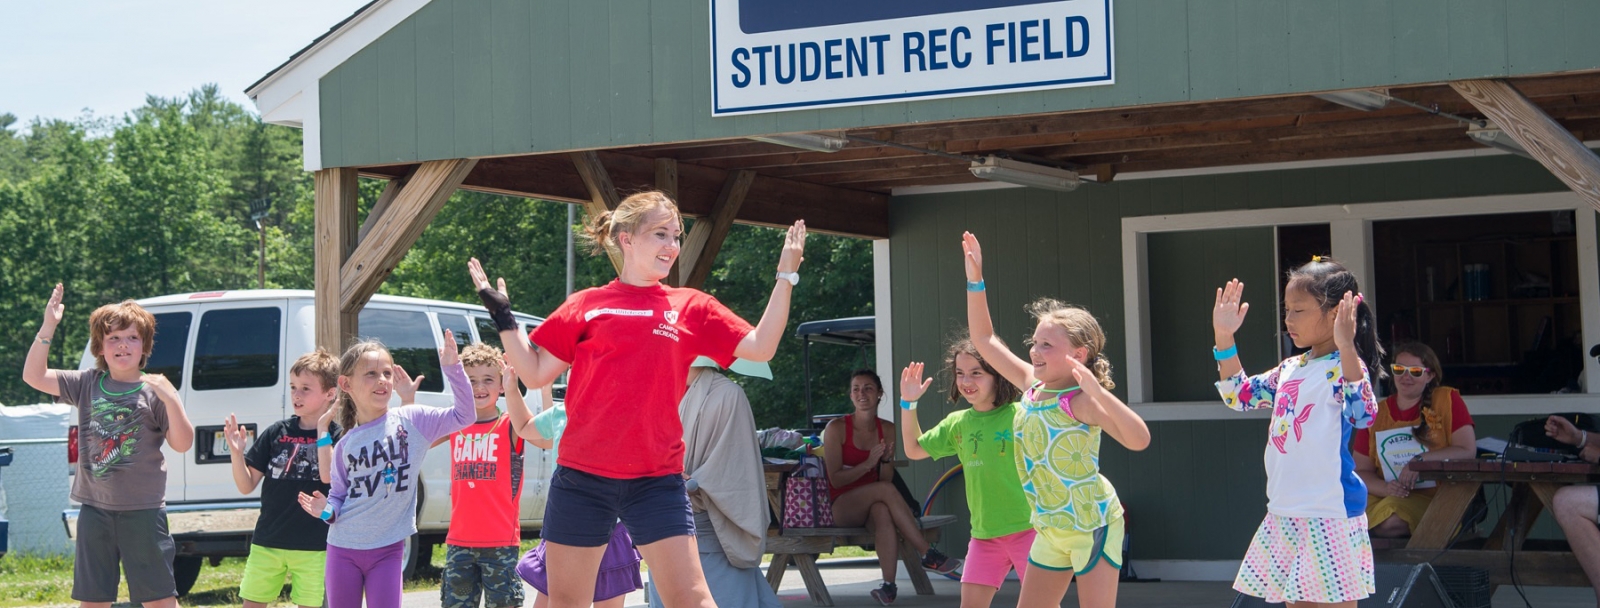 Camp Wildcat students dancing led by staff member